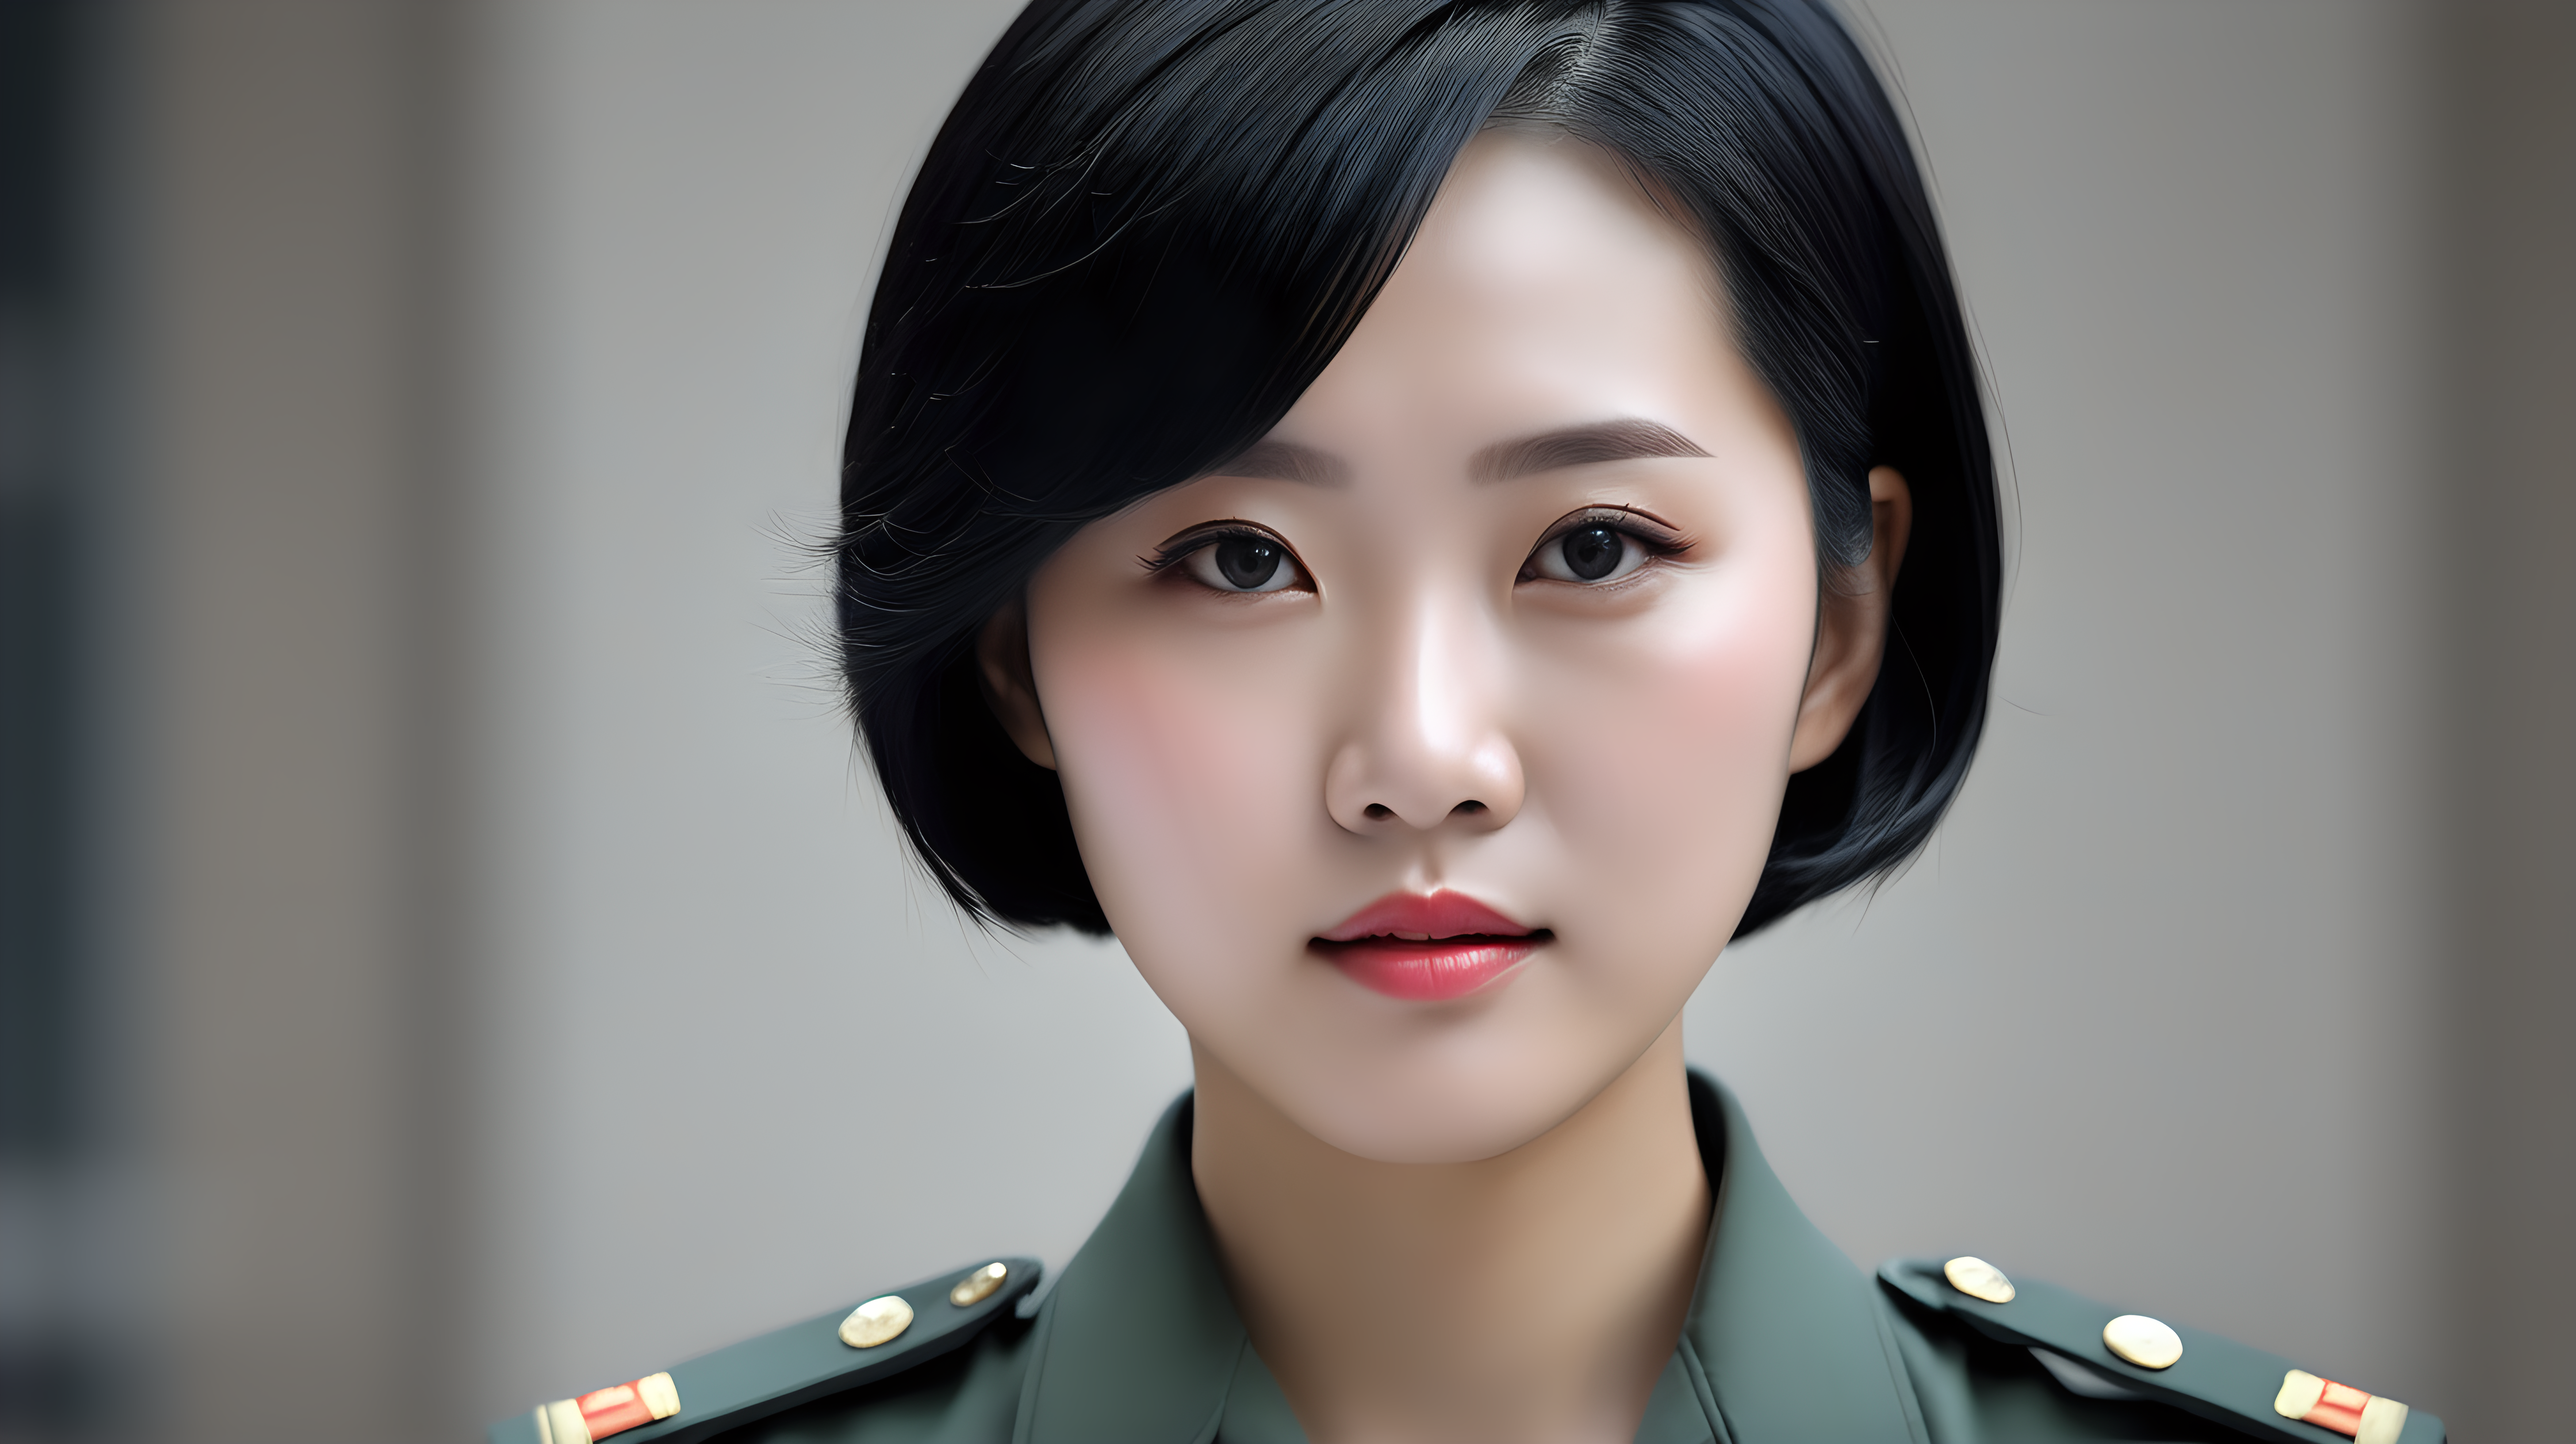 A female soldier of the Chinese Peoples Liberation